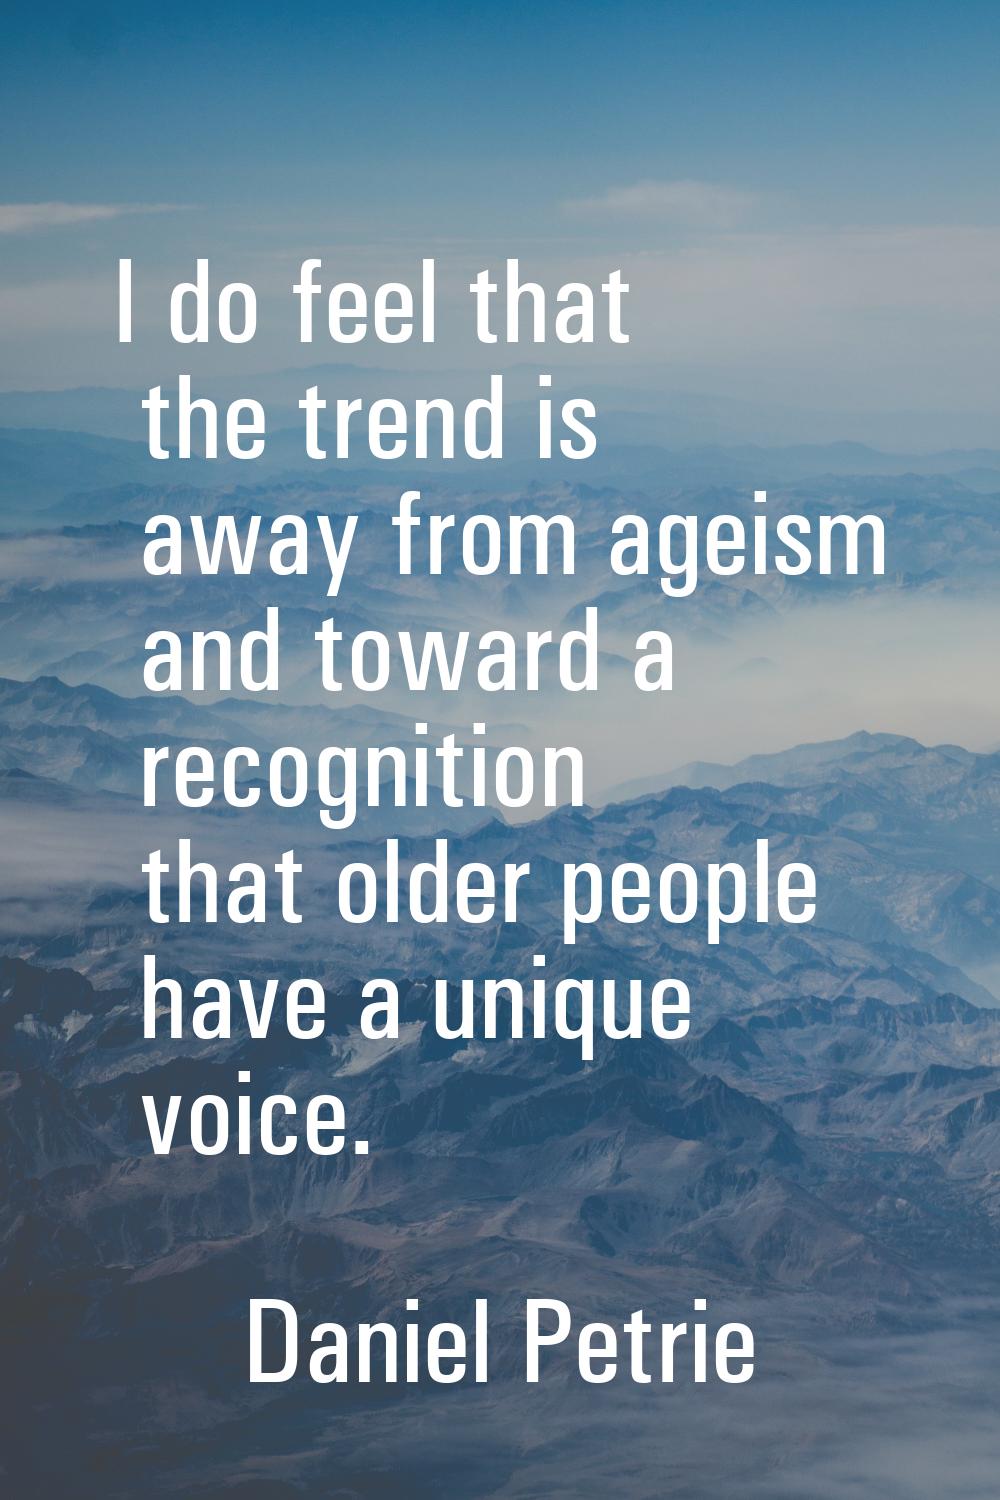 I do feel that the trend is away from ageism and toward a recognition that older people have a uniq